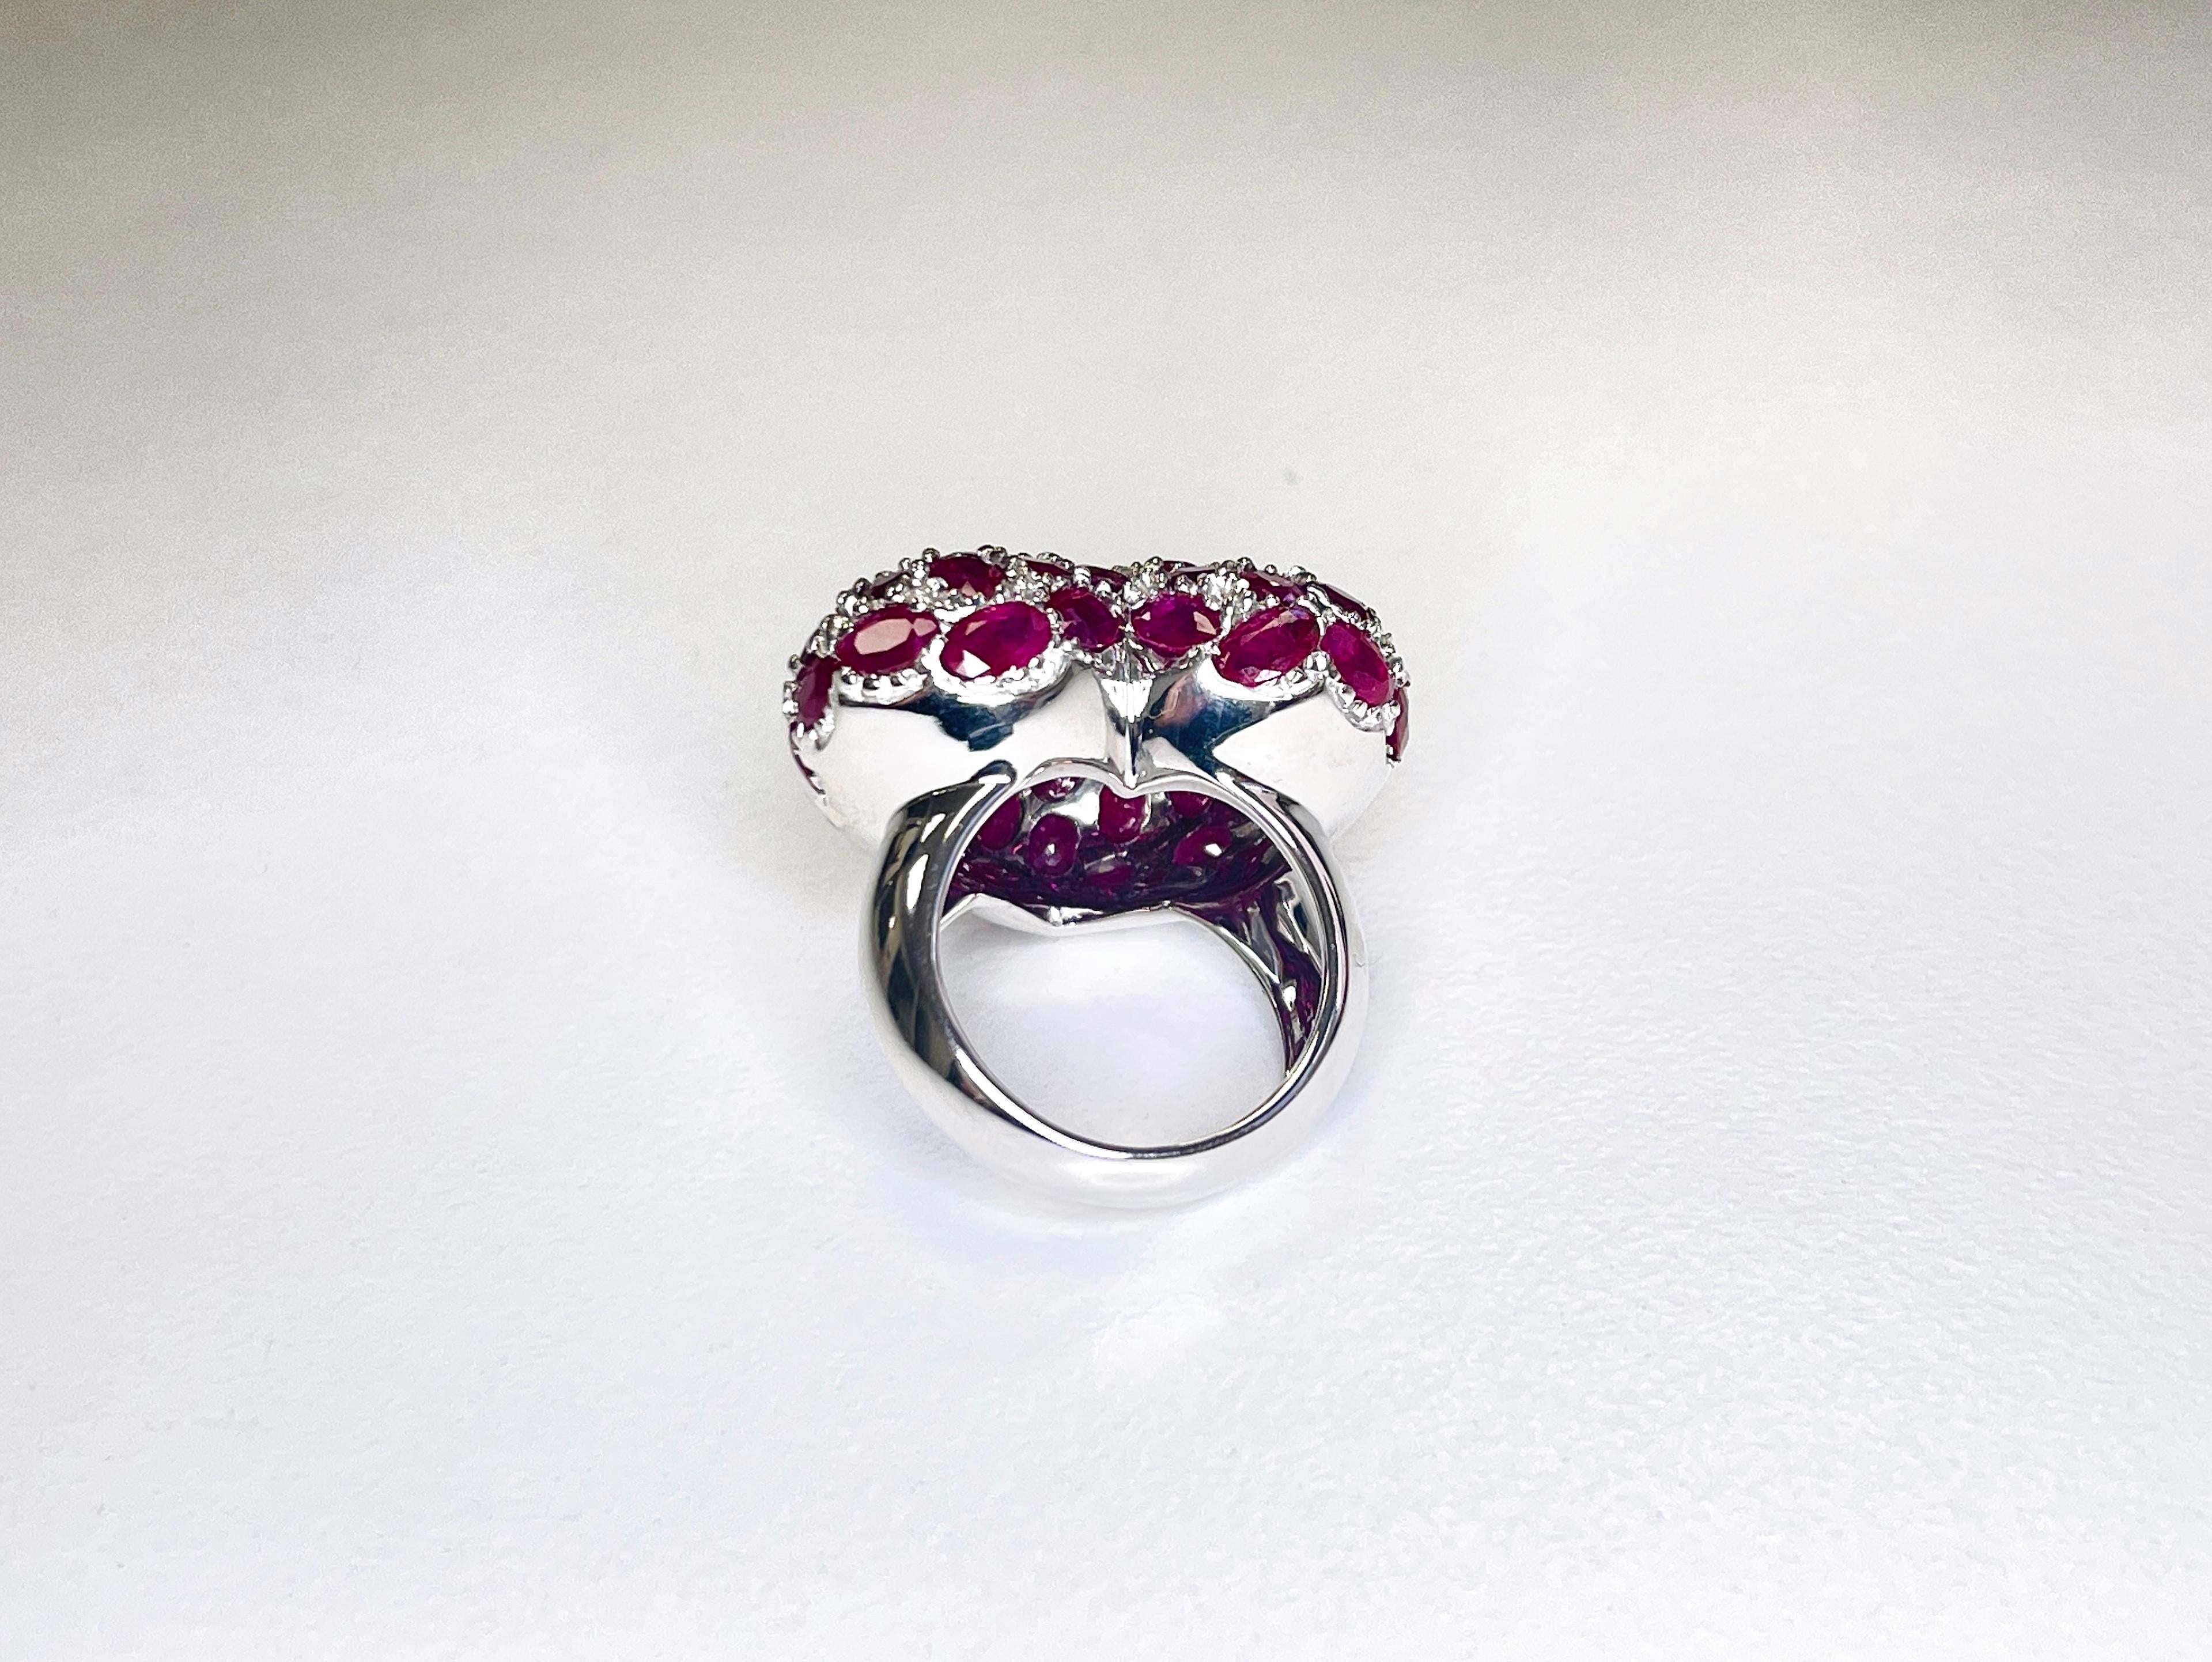 16.50cts White Gold Heart Ruby Oval Shape High Polished Rhodium Ring 18K 7 Inch For Sale 3